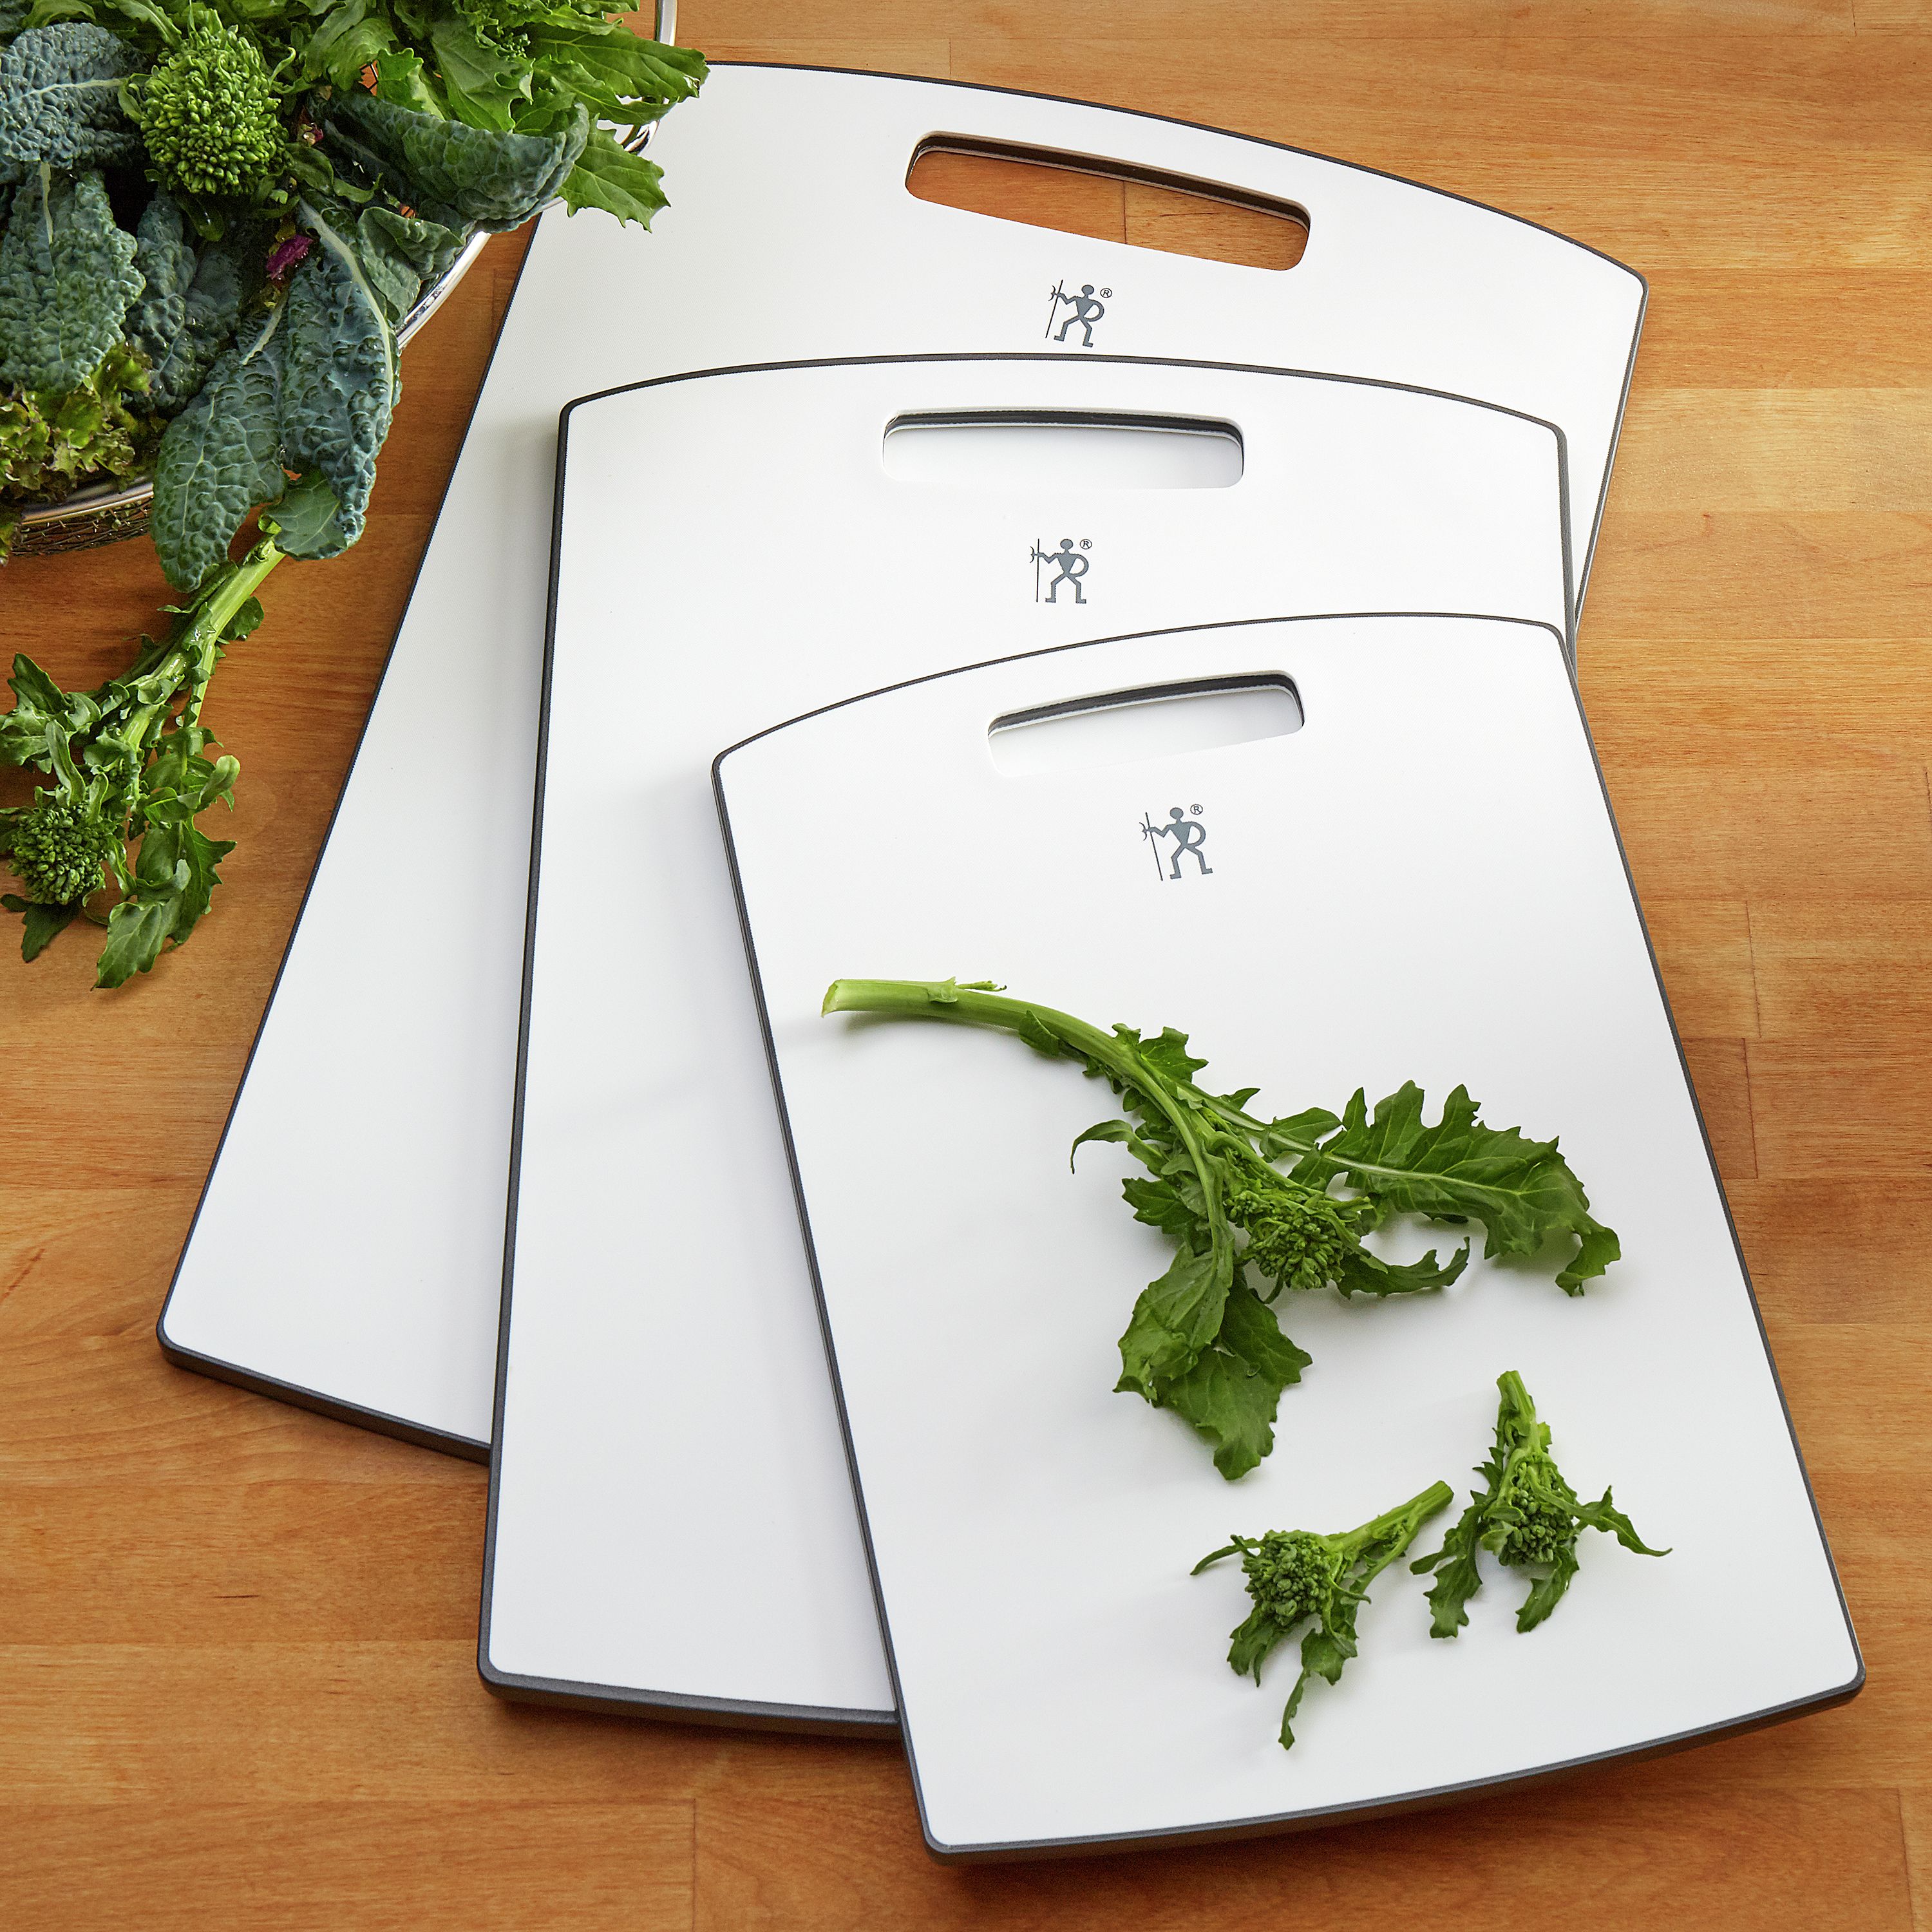 Henckels Cutting Board Set Of 2 (White), cutting board, Buy Online, UK  Delivery